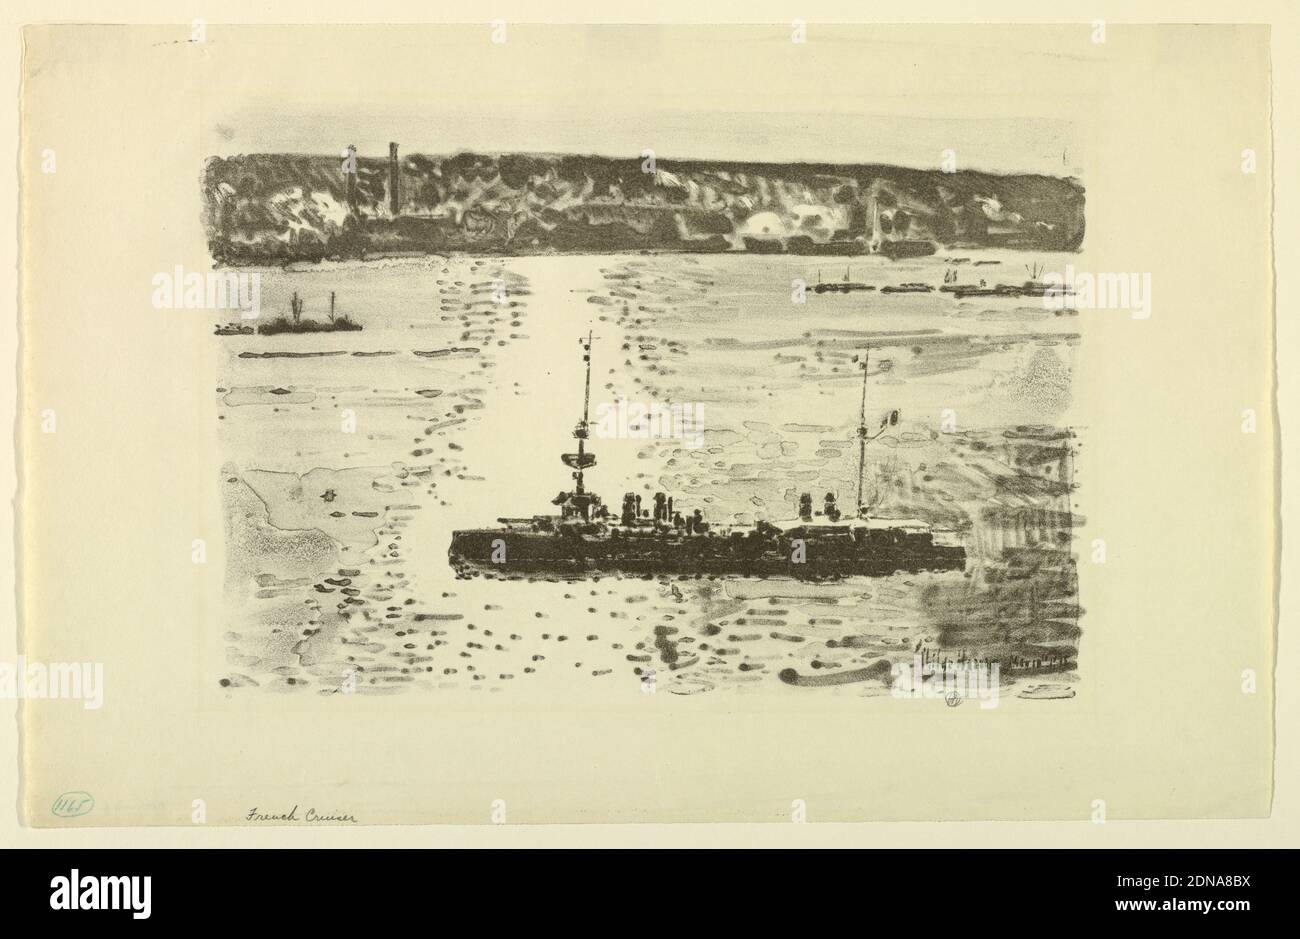 French Cruiser, Childe Hassam, American, 1859–1935, Lithograph on paper, A naval ship is seen in the Hudson River, with the New Jersey shore line in the distance., USA, May 10, 1918, seascapes, Print Stock Photo